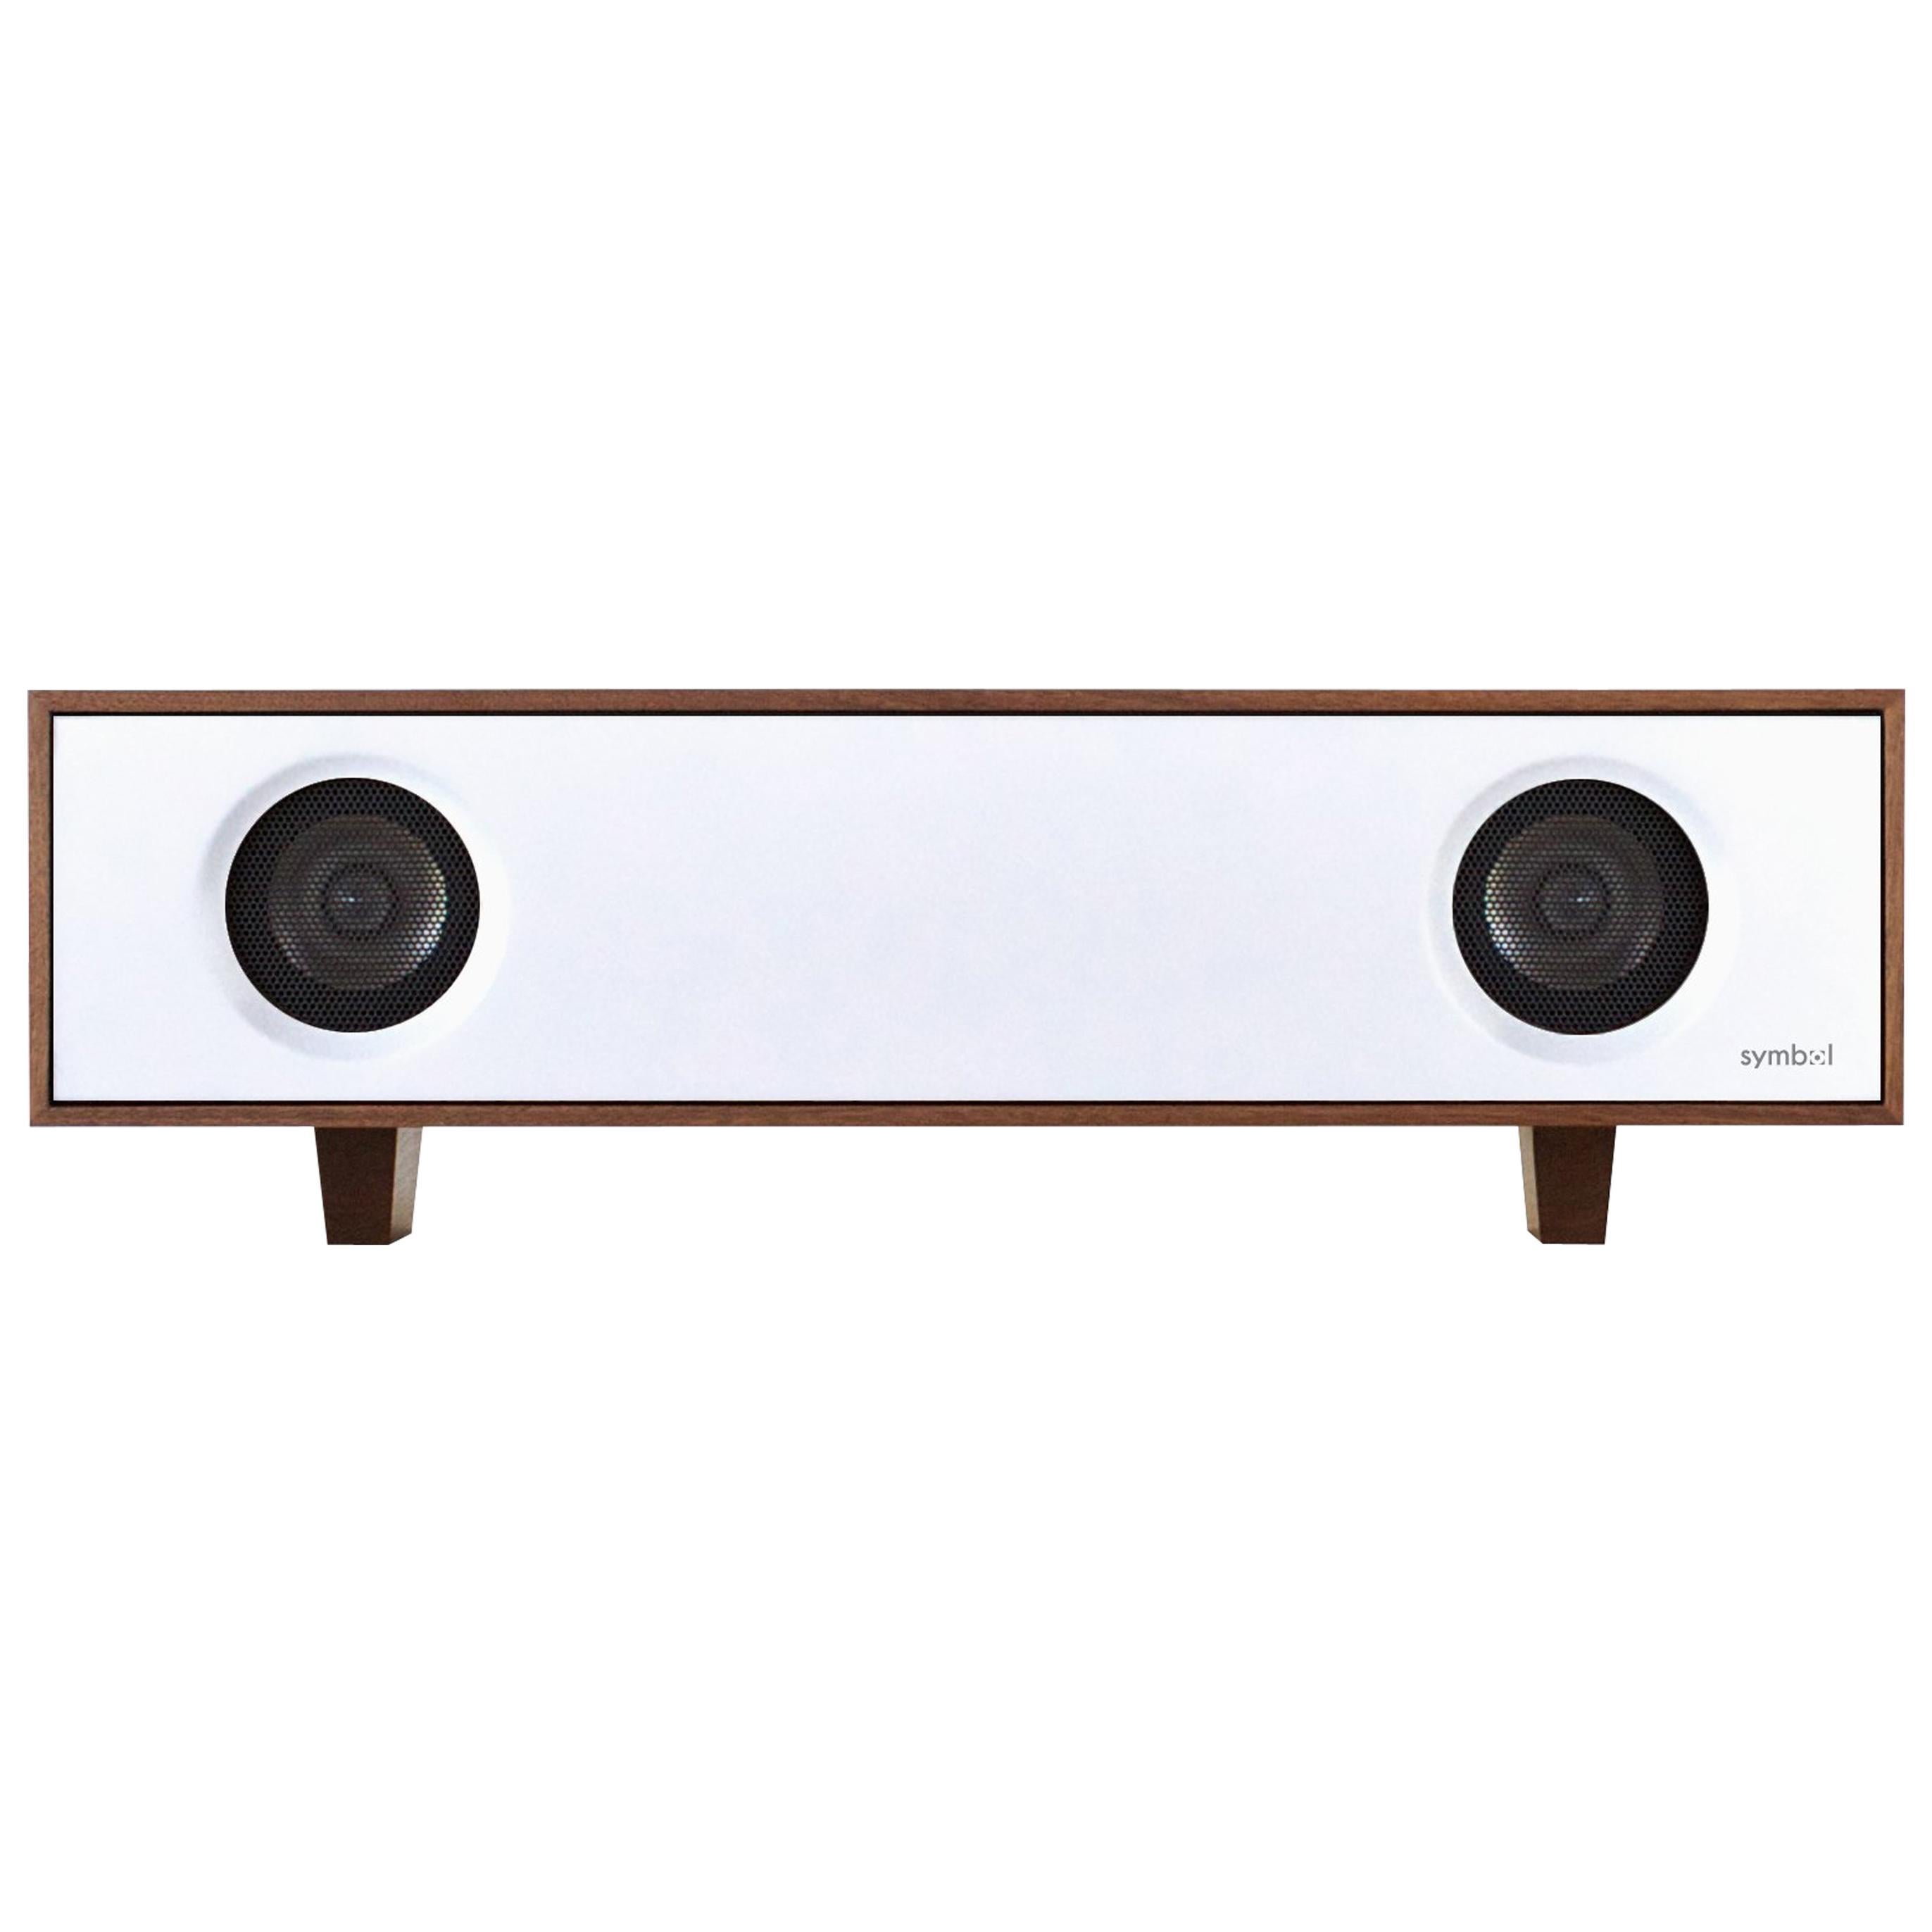 The tabletop HiFi is an amplified speaker cabinet that delivers a pure, rich sound from any audio source. The stereo cabinet is handcrafted in New York's Hudson Valley in a variety of lacquer finishes mixed with natural solid wood. Designed by